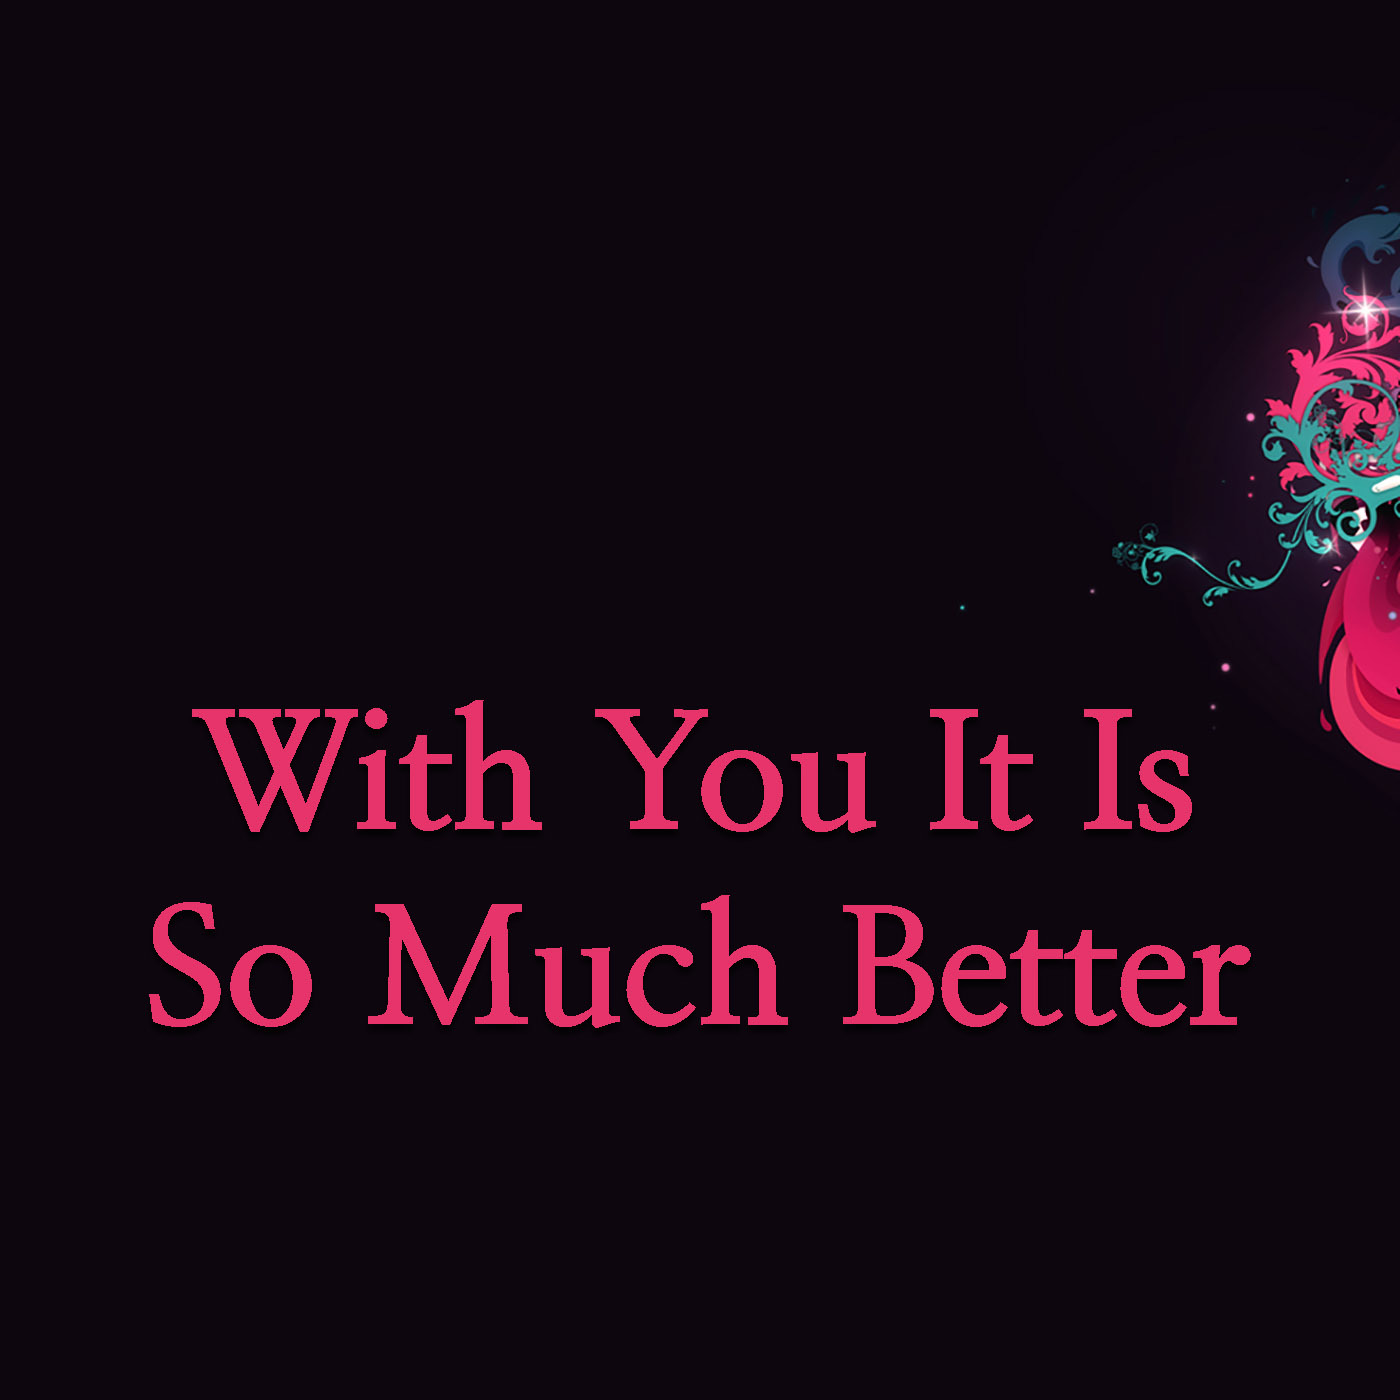 With You It Is So Much Better